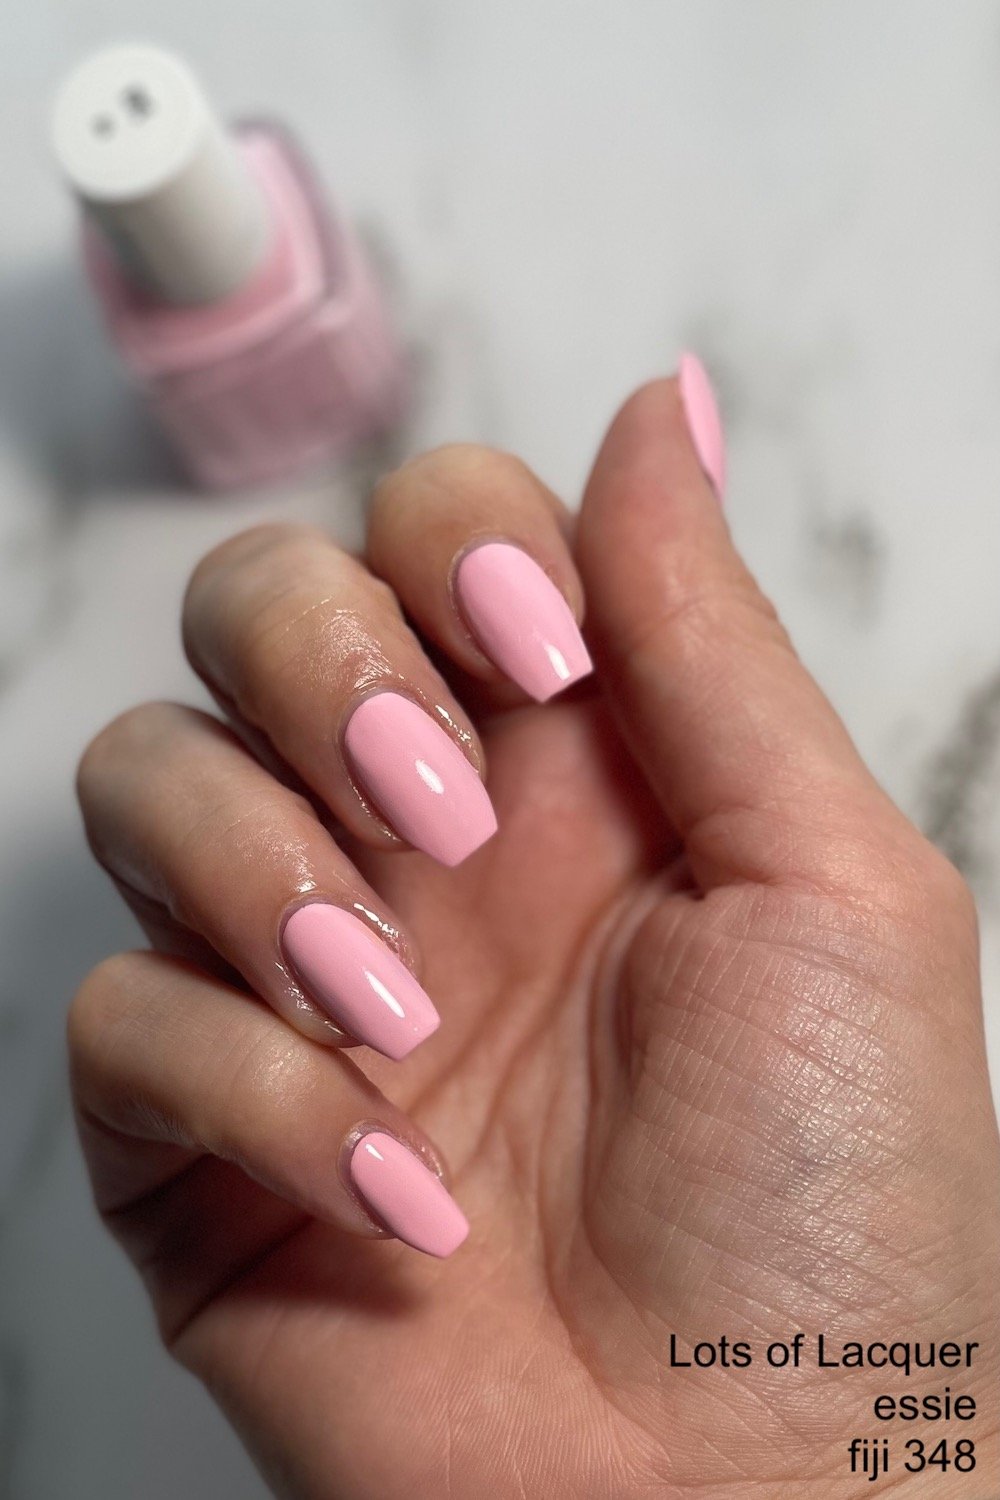 Telford Centre - Meeting with friends this weekend? Be on trend with this  Spring lilac #essie pastel shade nail polish, boasting full coverage and a  high shine finish, perfect for all your